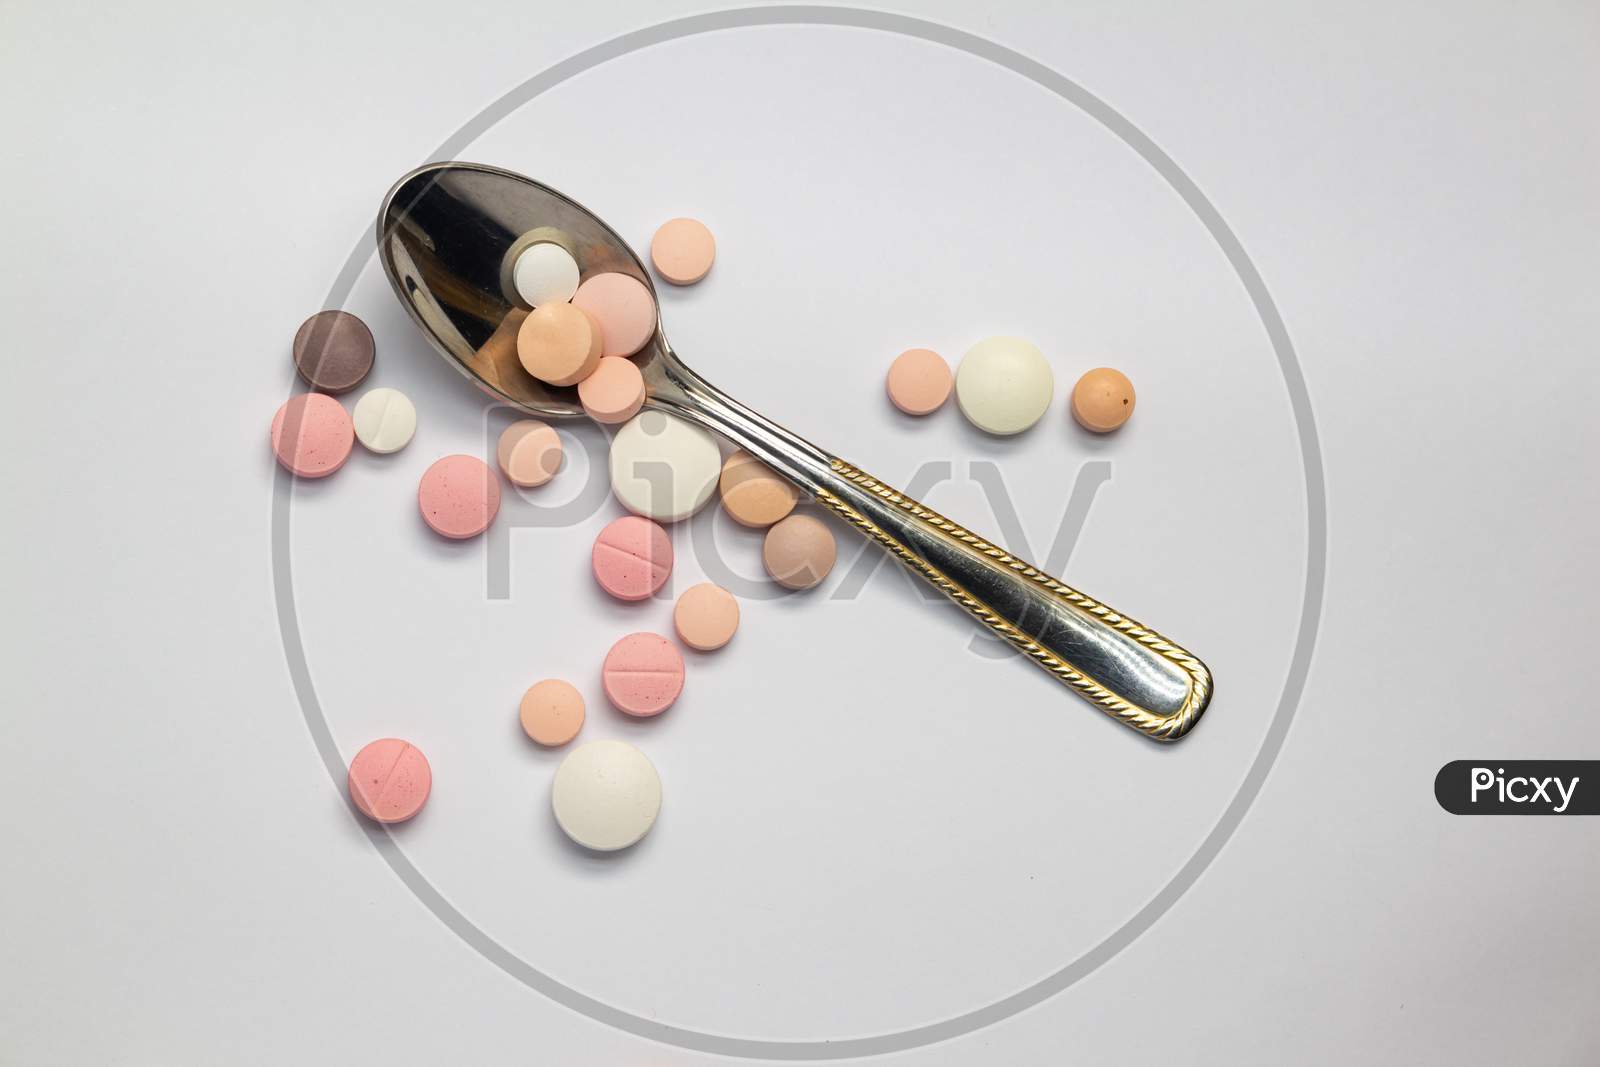 Colored Pills Or Medications On A Neutral Background Next To A Small Spoon.